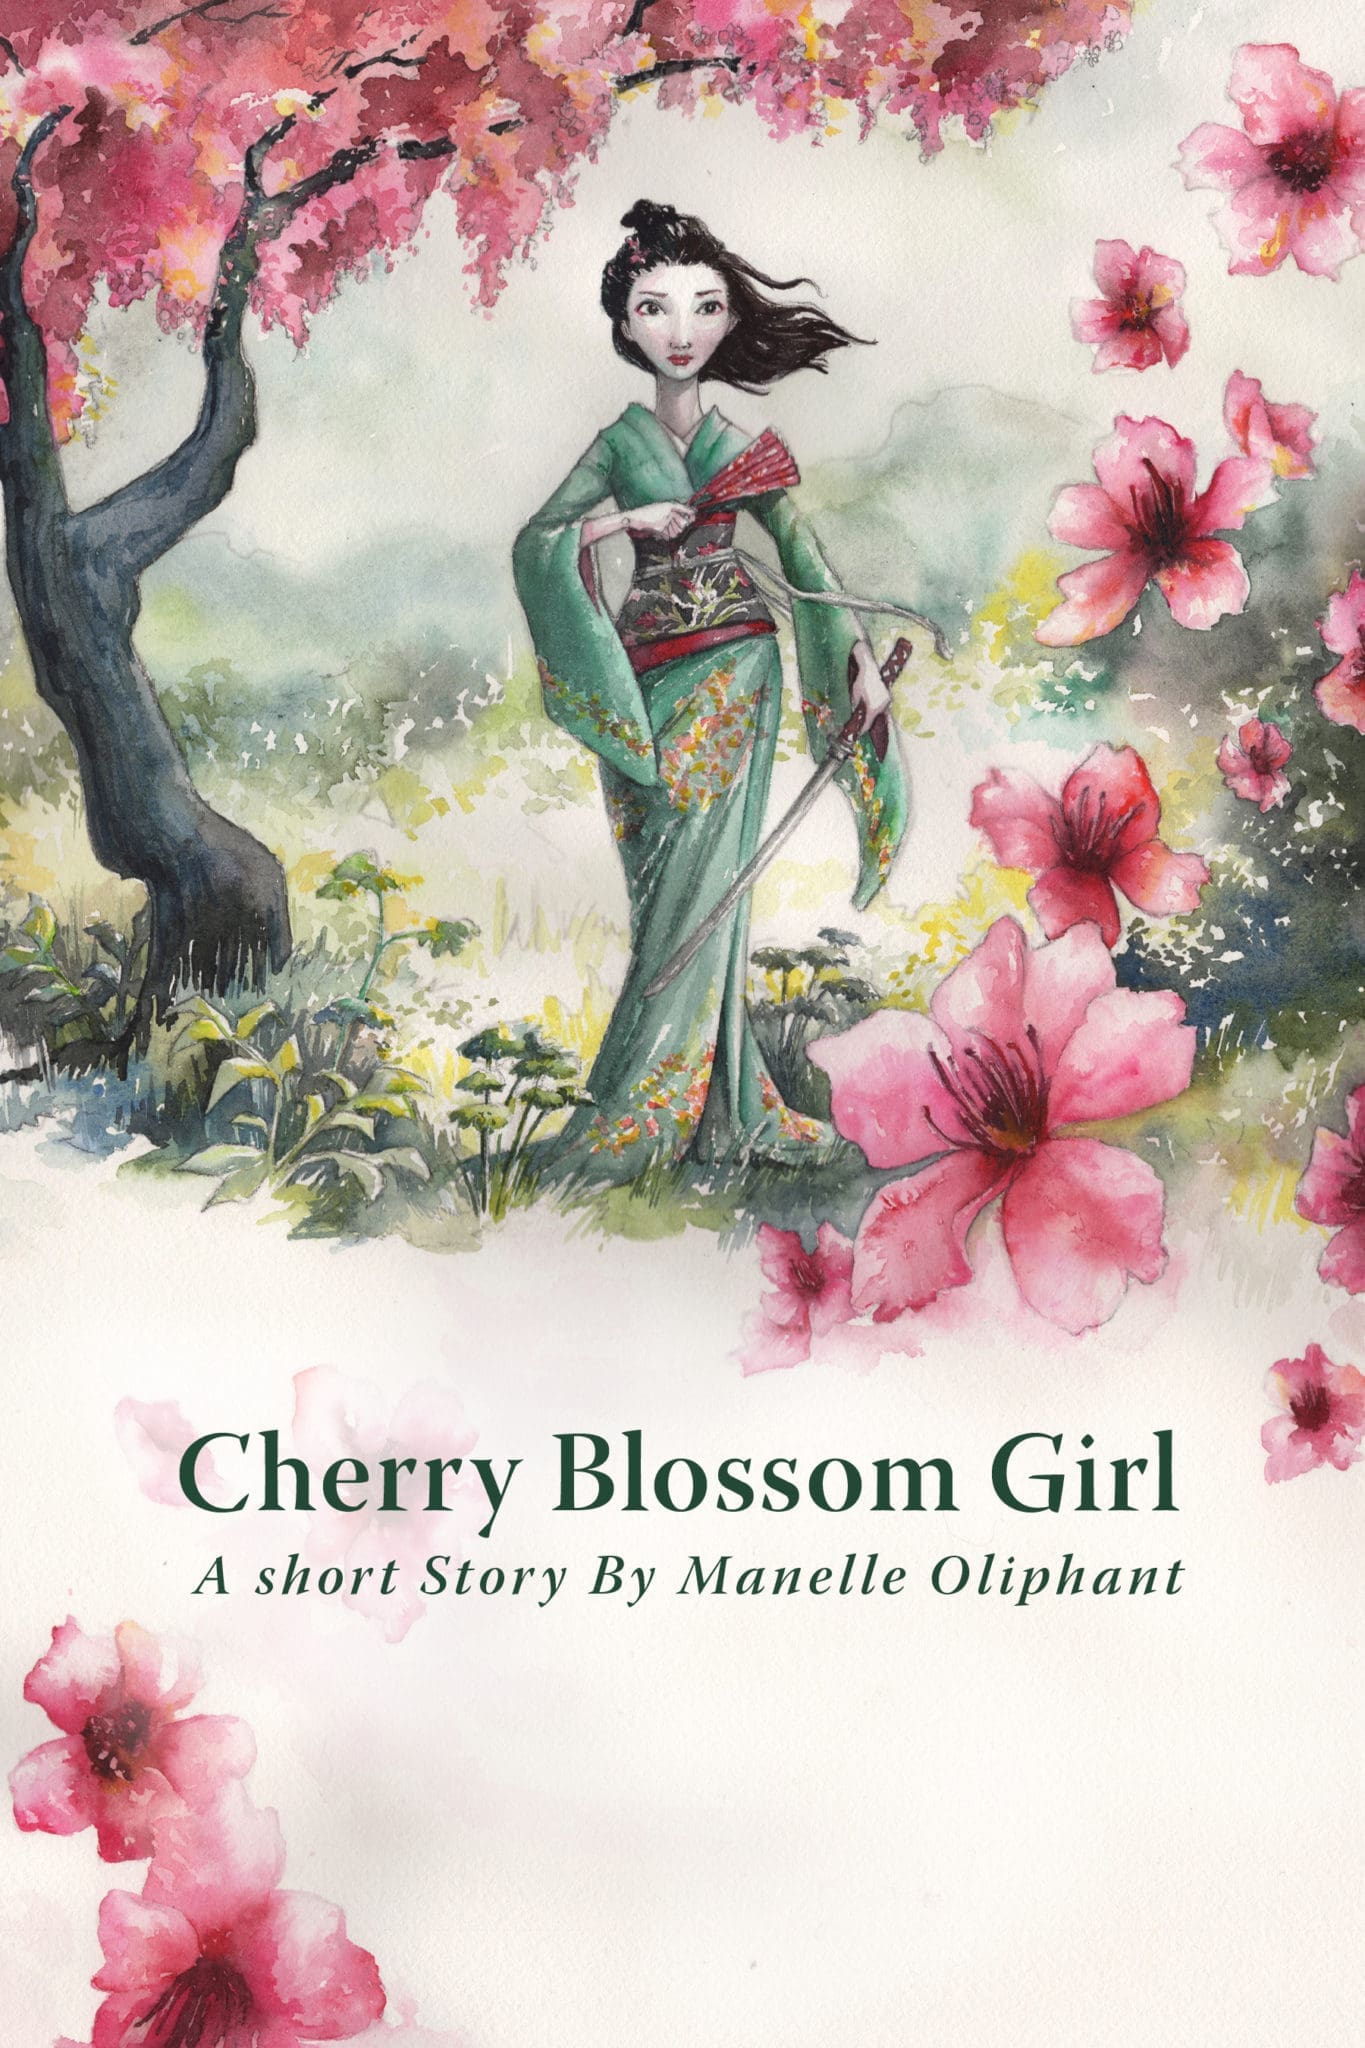 Cherry Blossom Girl by Manelle Oliphant